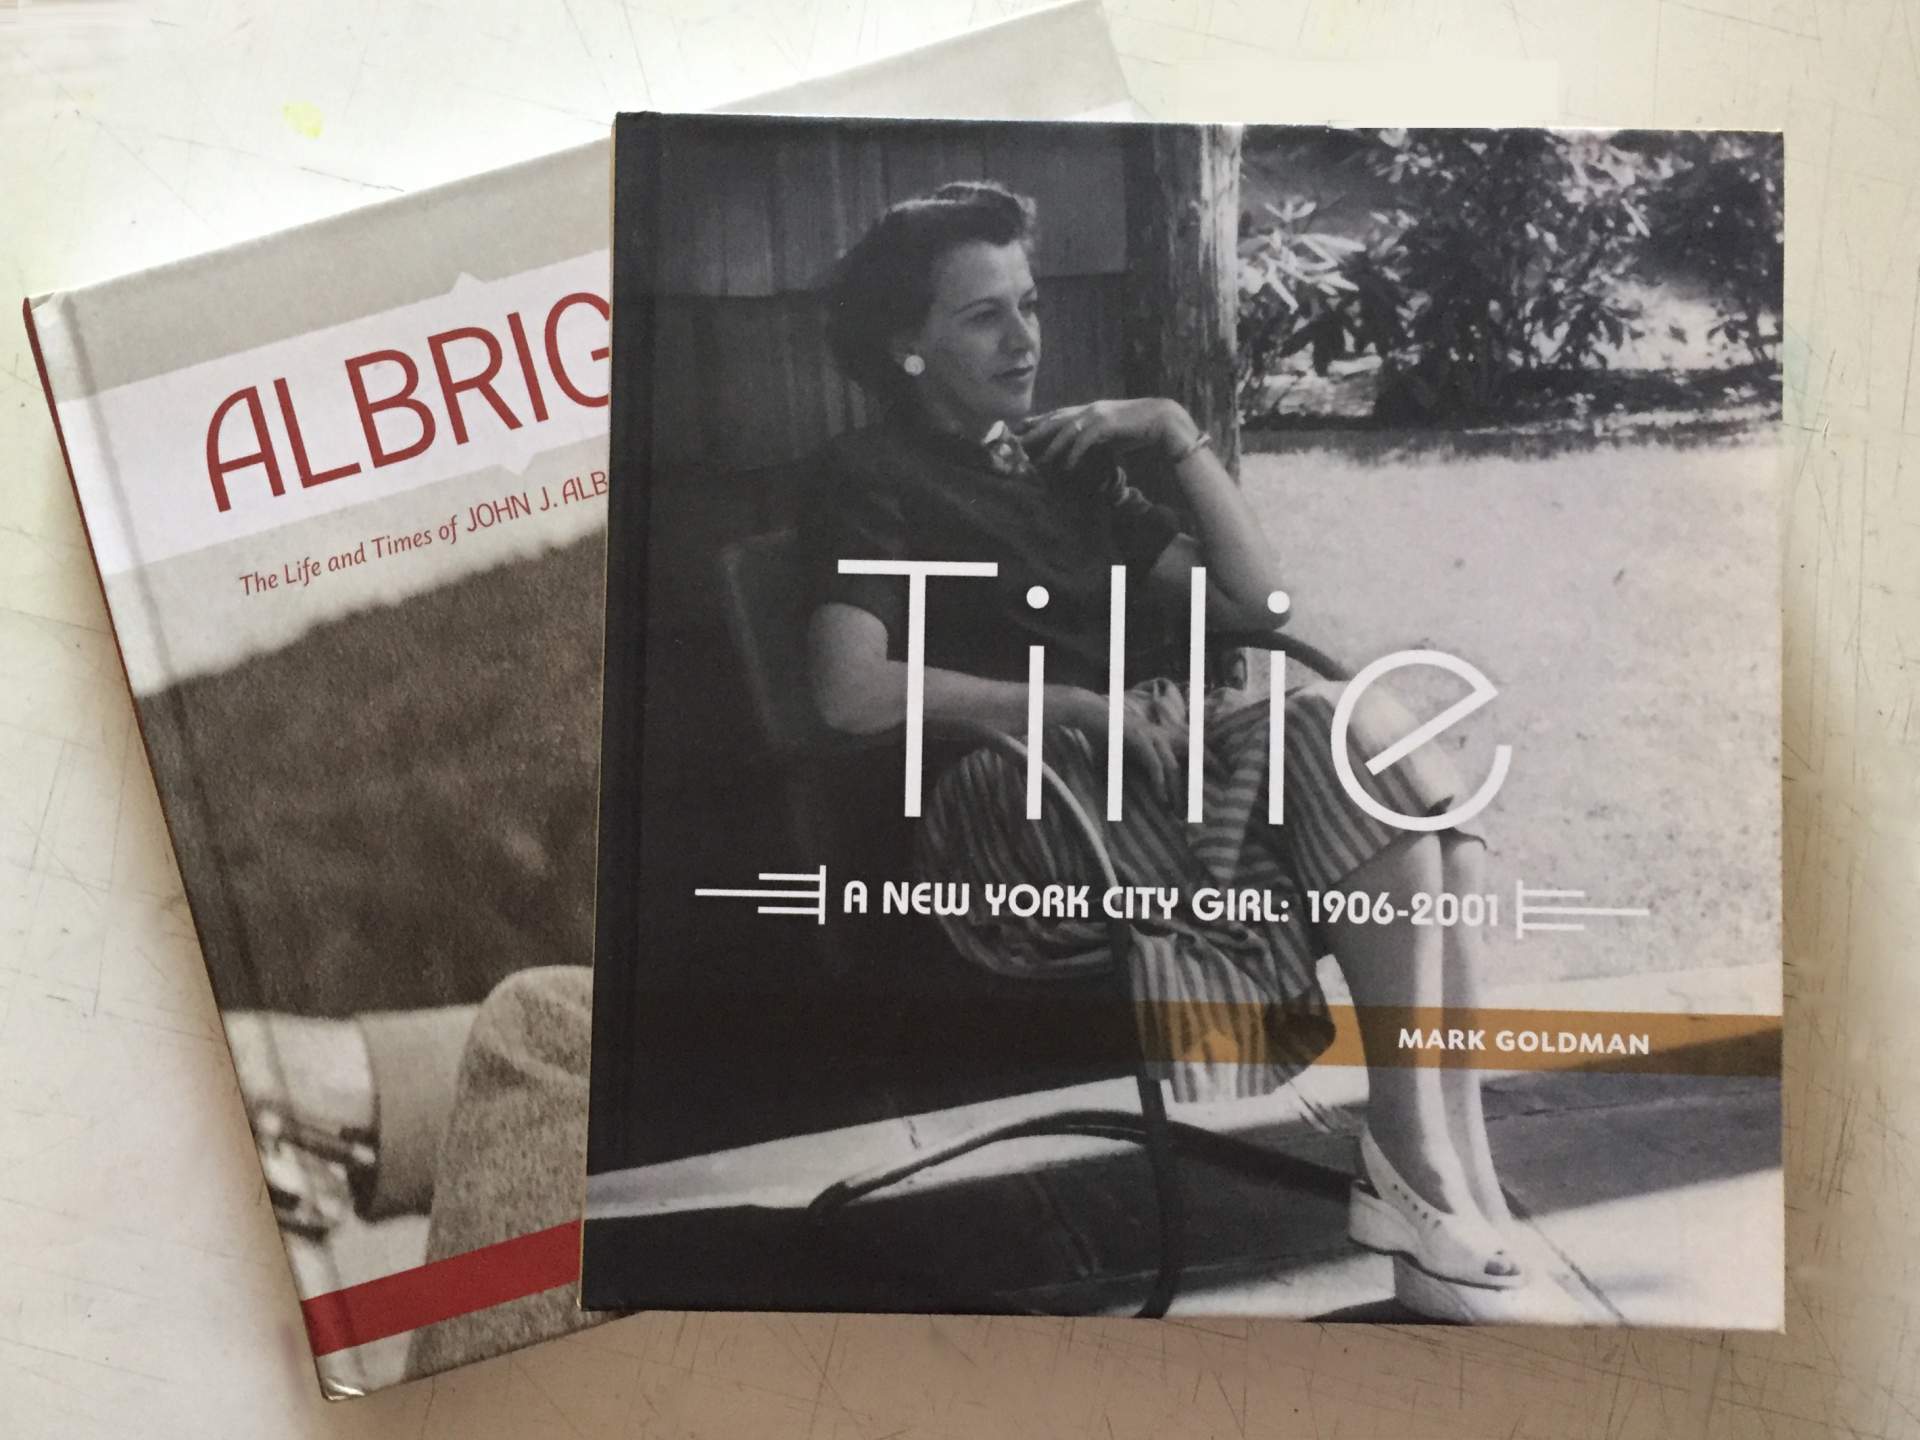 Mark Goldman, Albright: The Life and Times of John J. Albright and Tillie, A New York Girl: 1906-2001